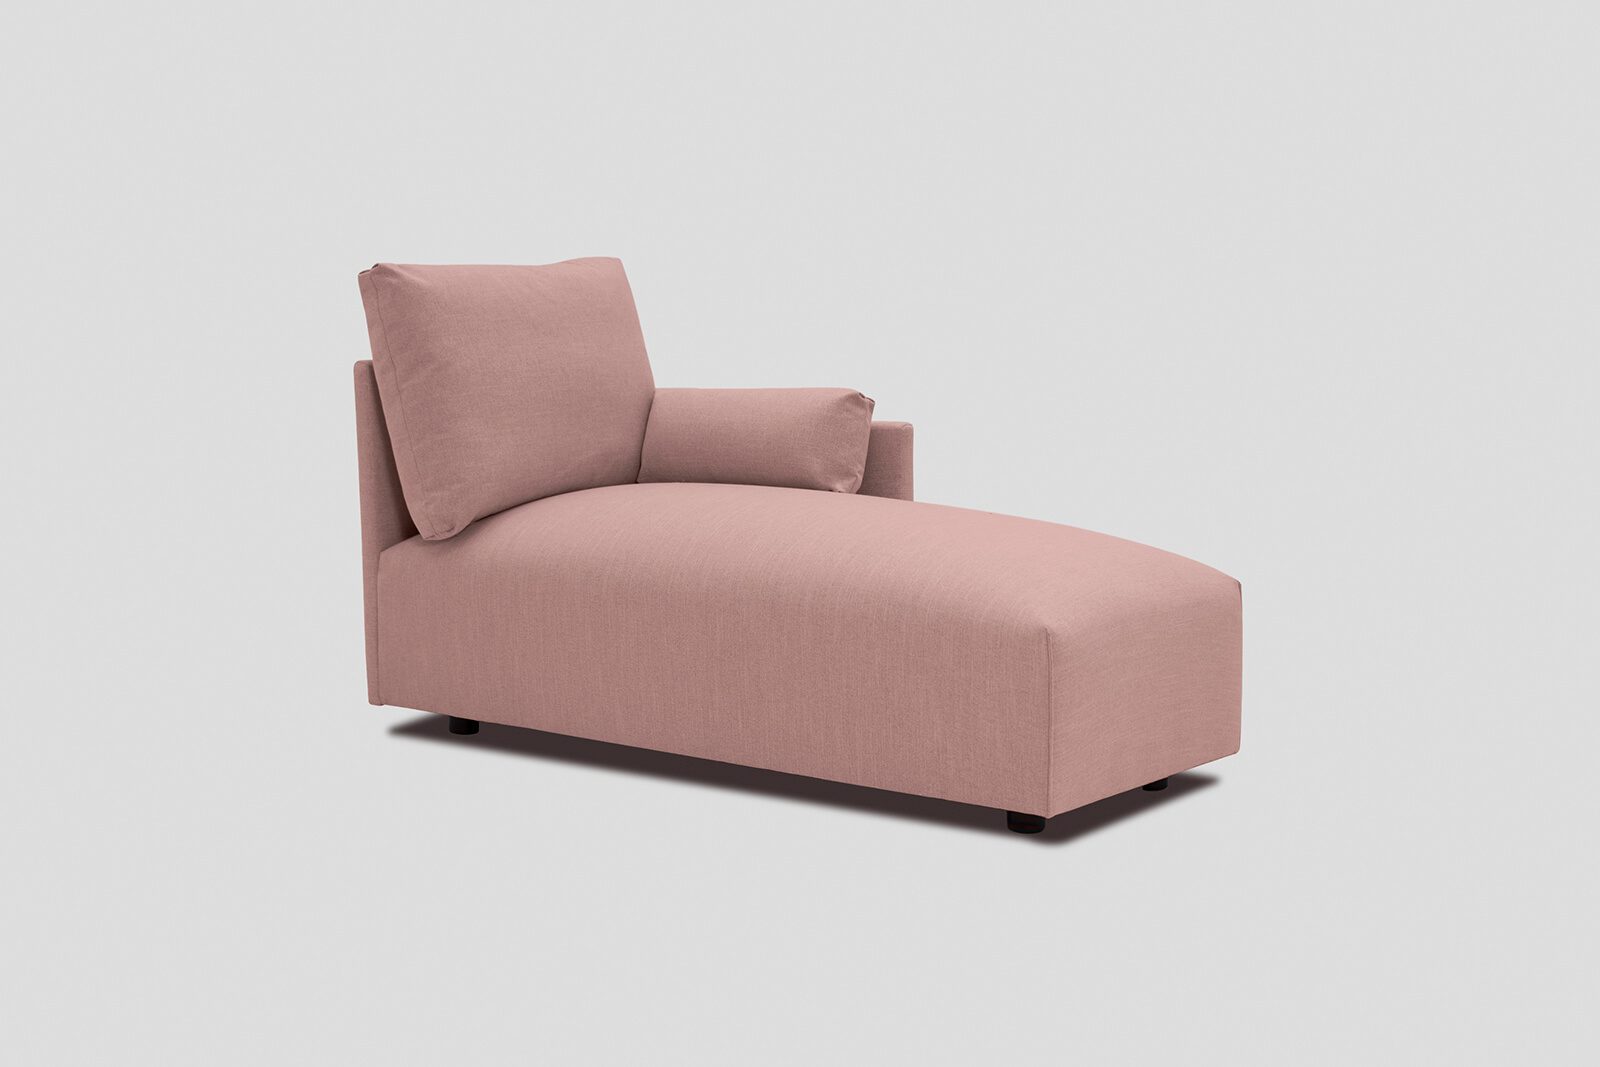 HB04-chaise-longue-rosewater-3q-right